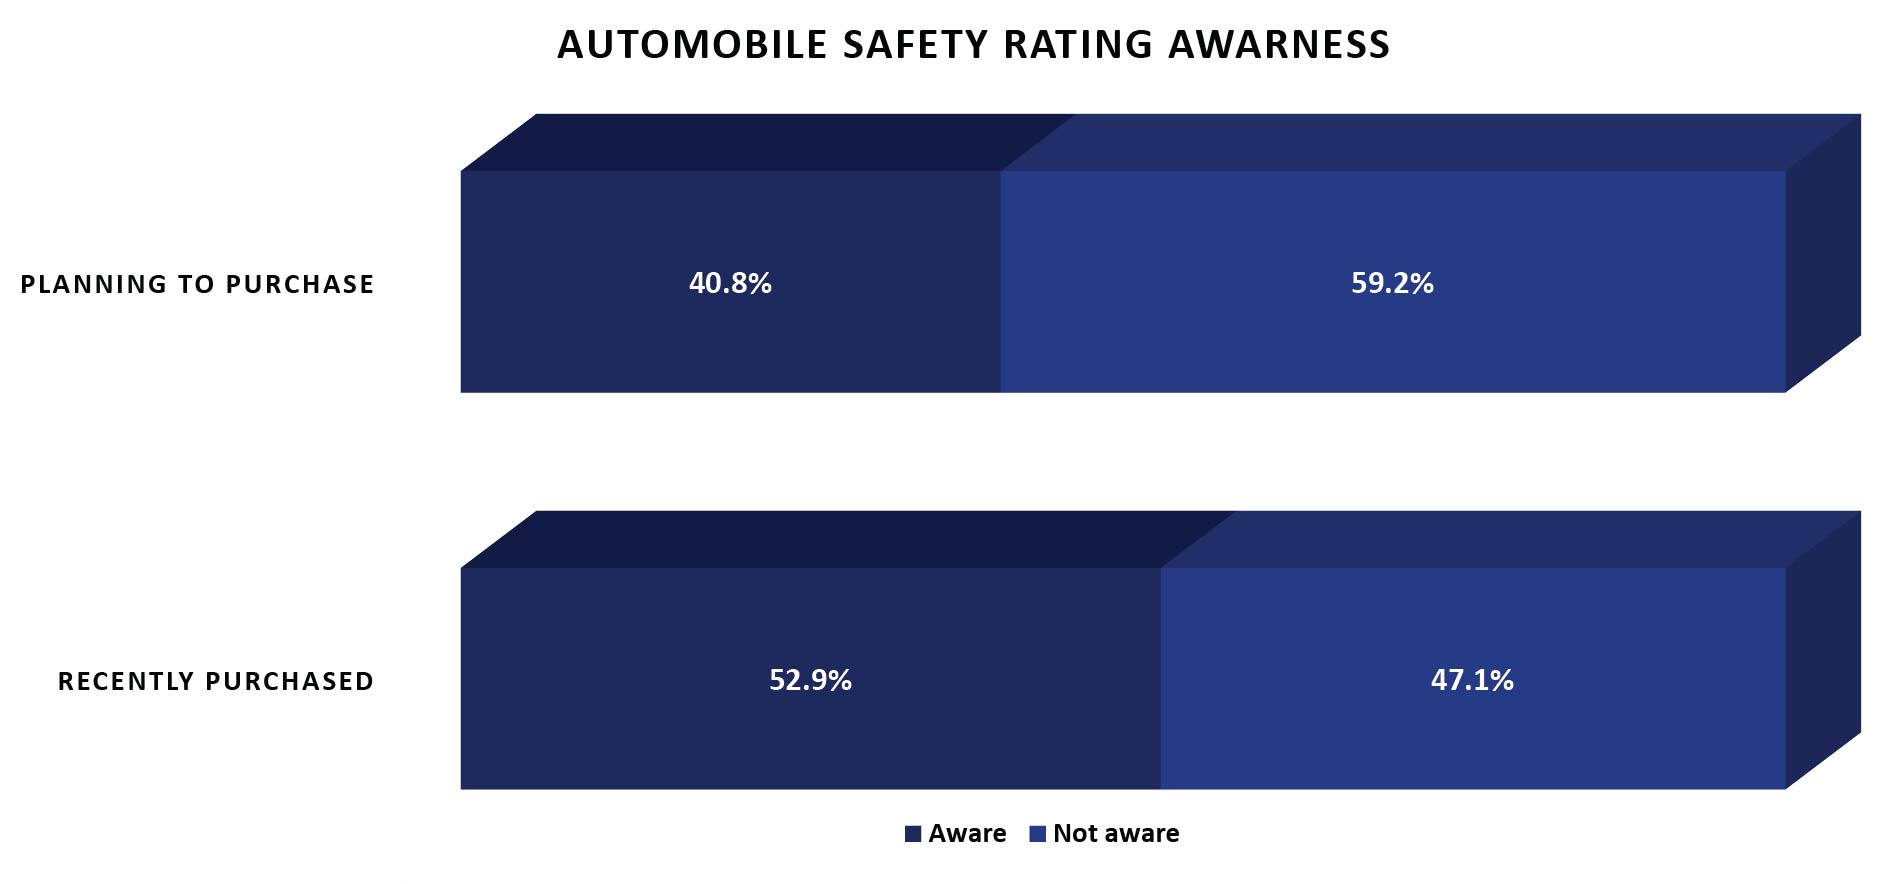 Automobile Safety Rating Awareness in Colombia